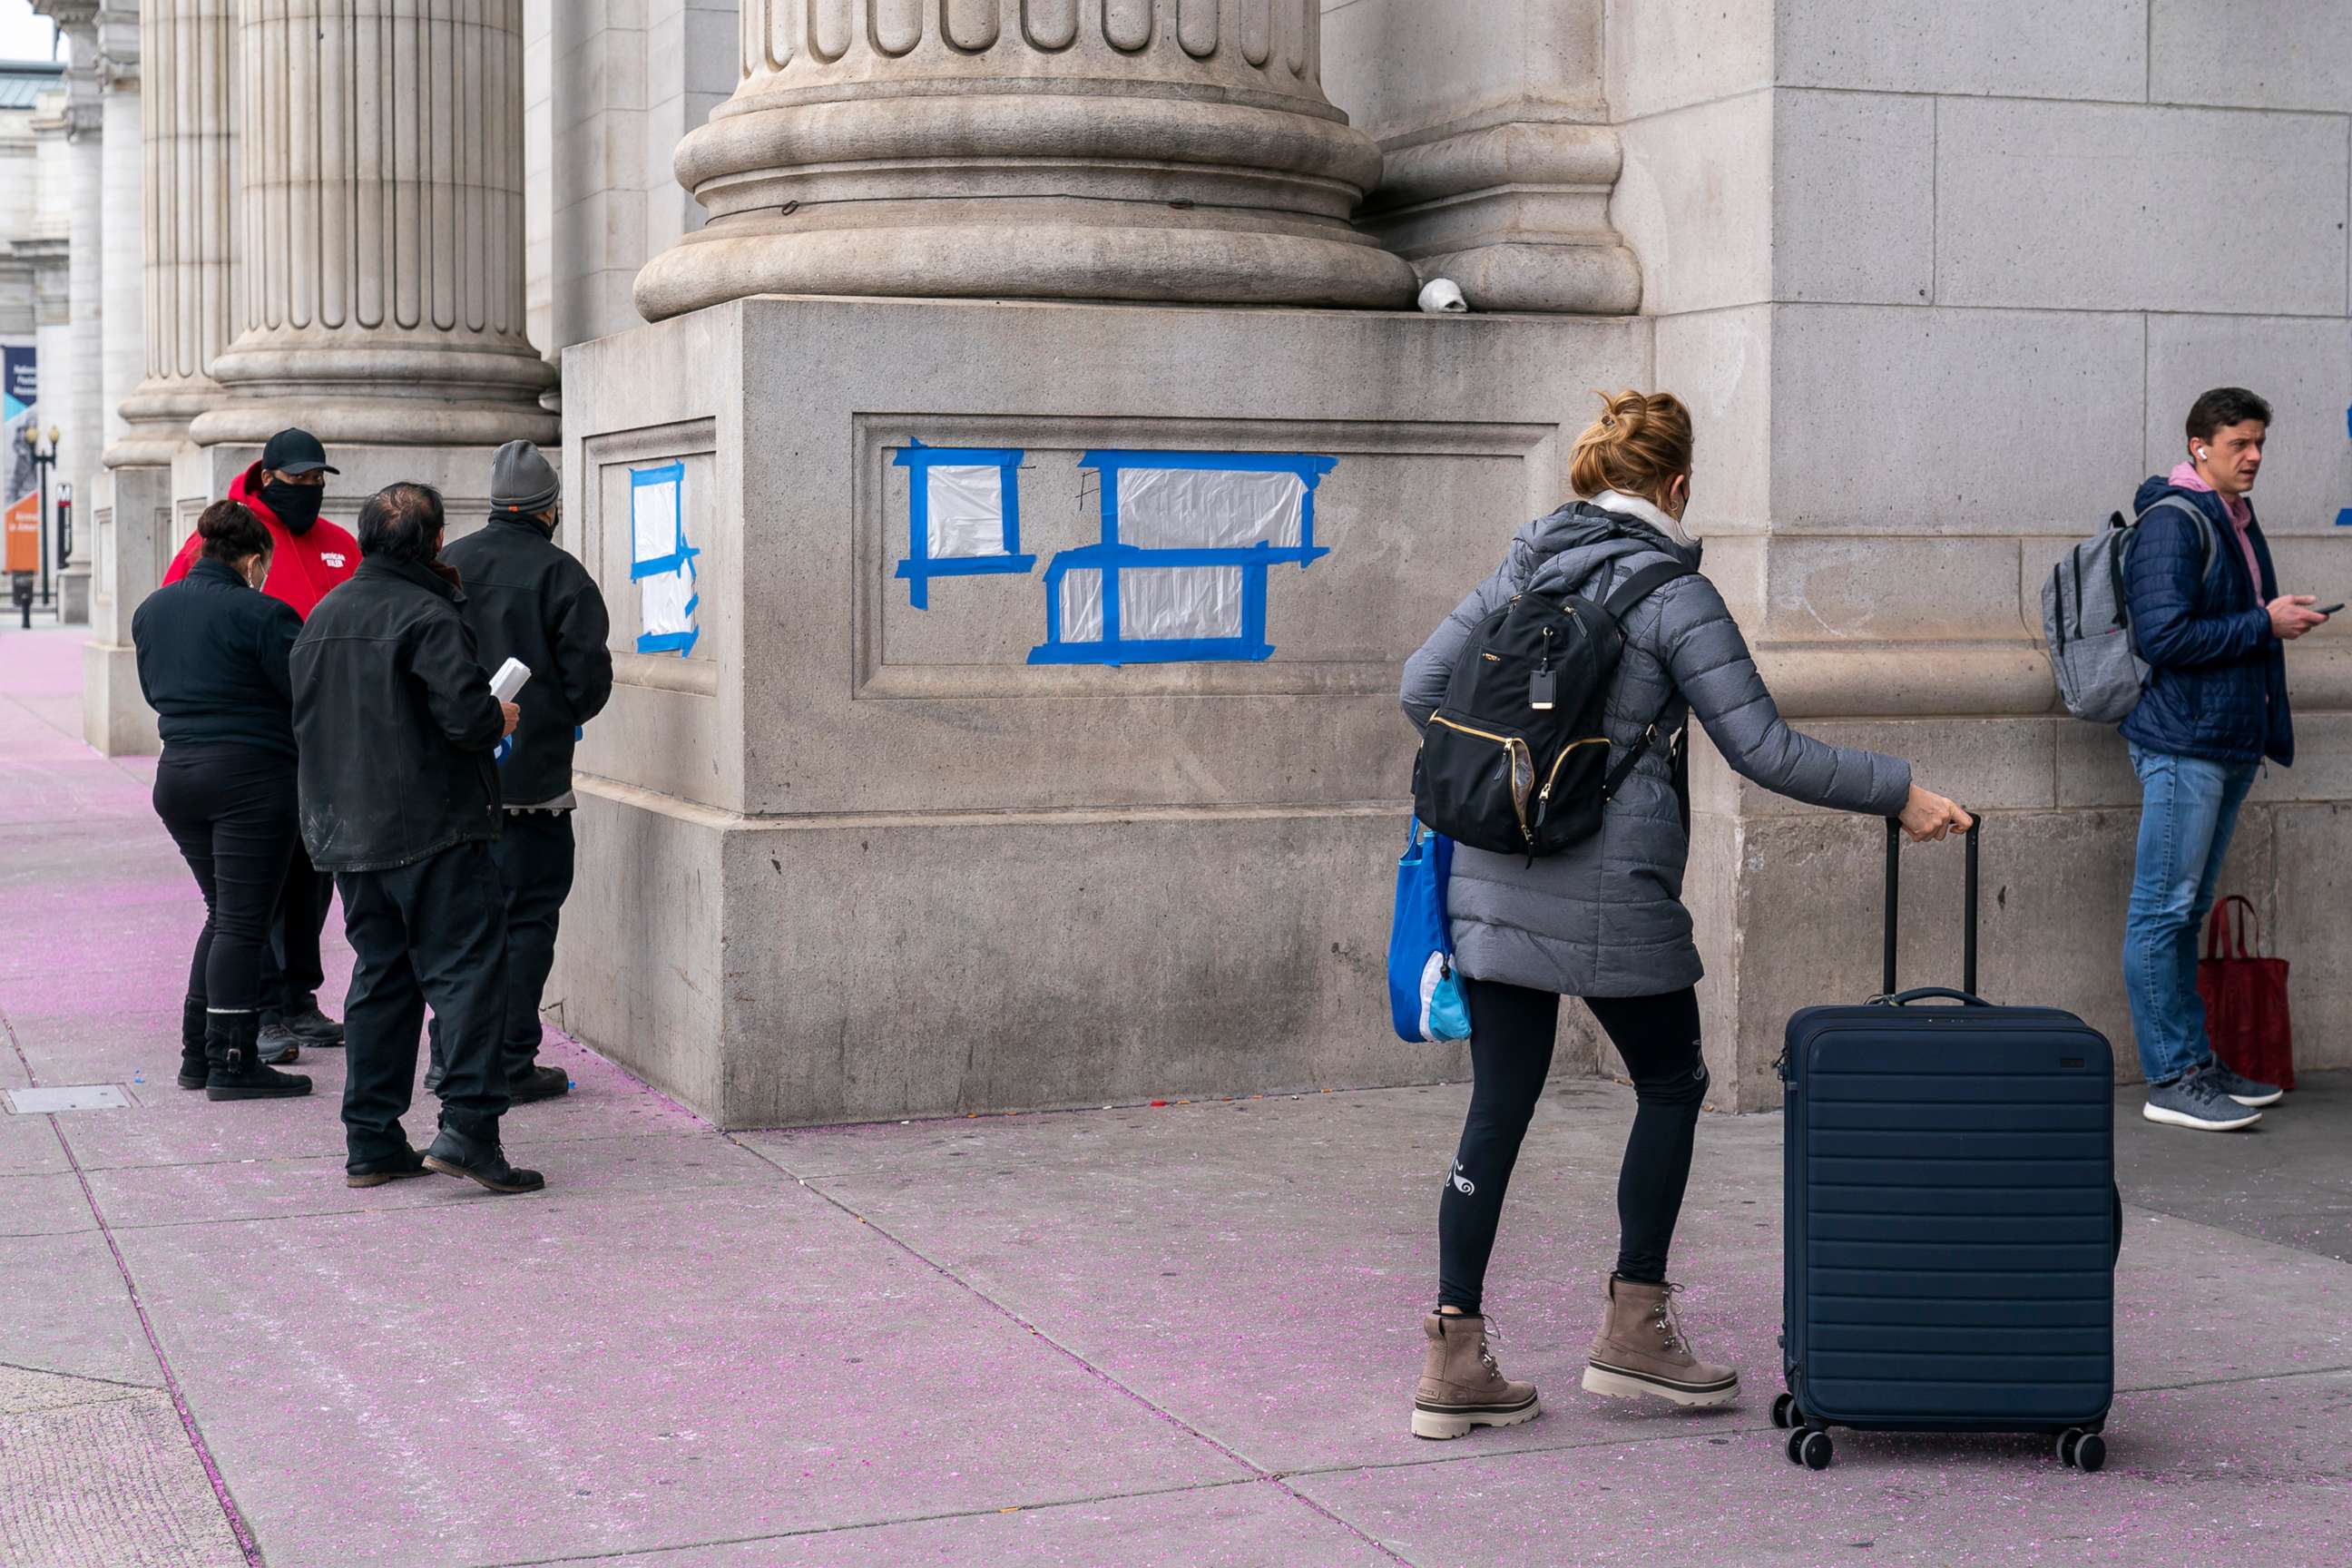 PHOTO: Blue tape and plastic covers swastikas that were graffitied on the front of Union Station near the Capitol, Jan. 28, 2022.